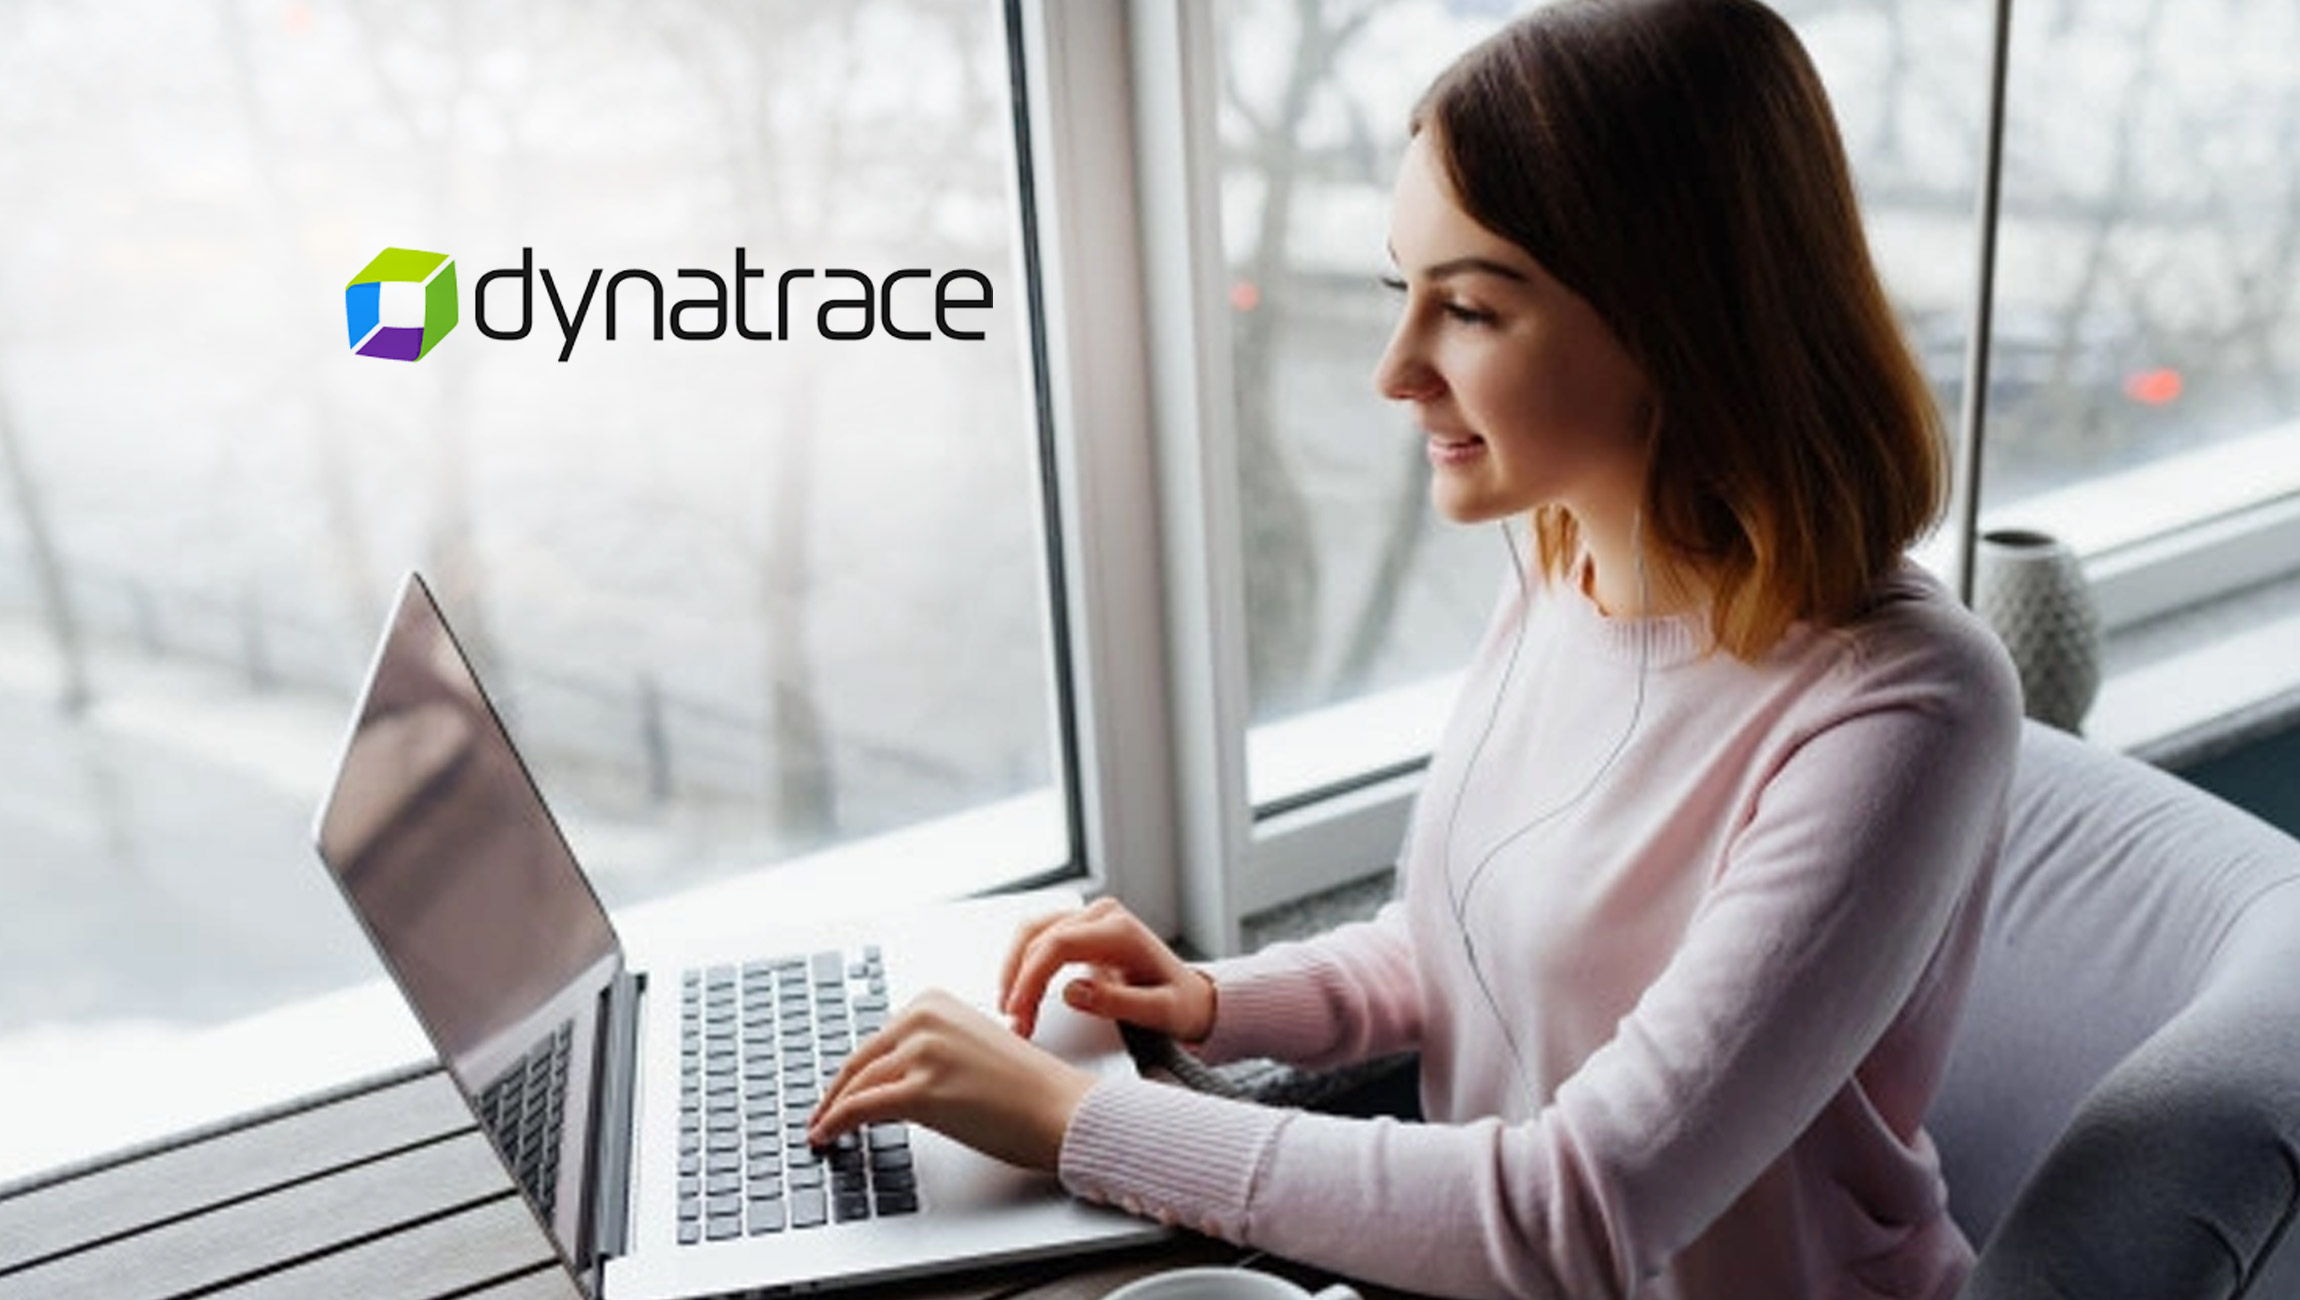 Dynatrace Joins Forces With Technology Leaders to Launch OpenFeature, the New Standard for Feature Flagging and Management Solutions